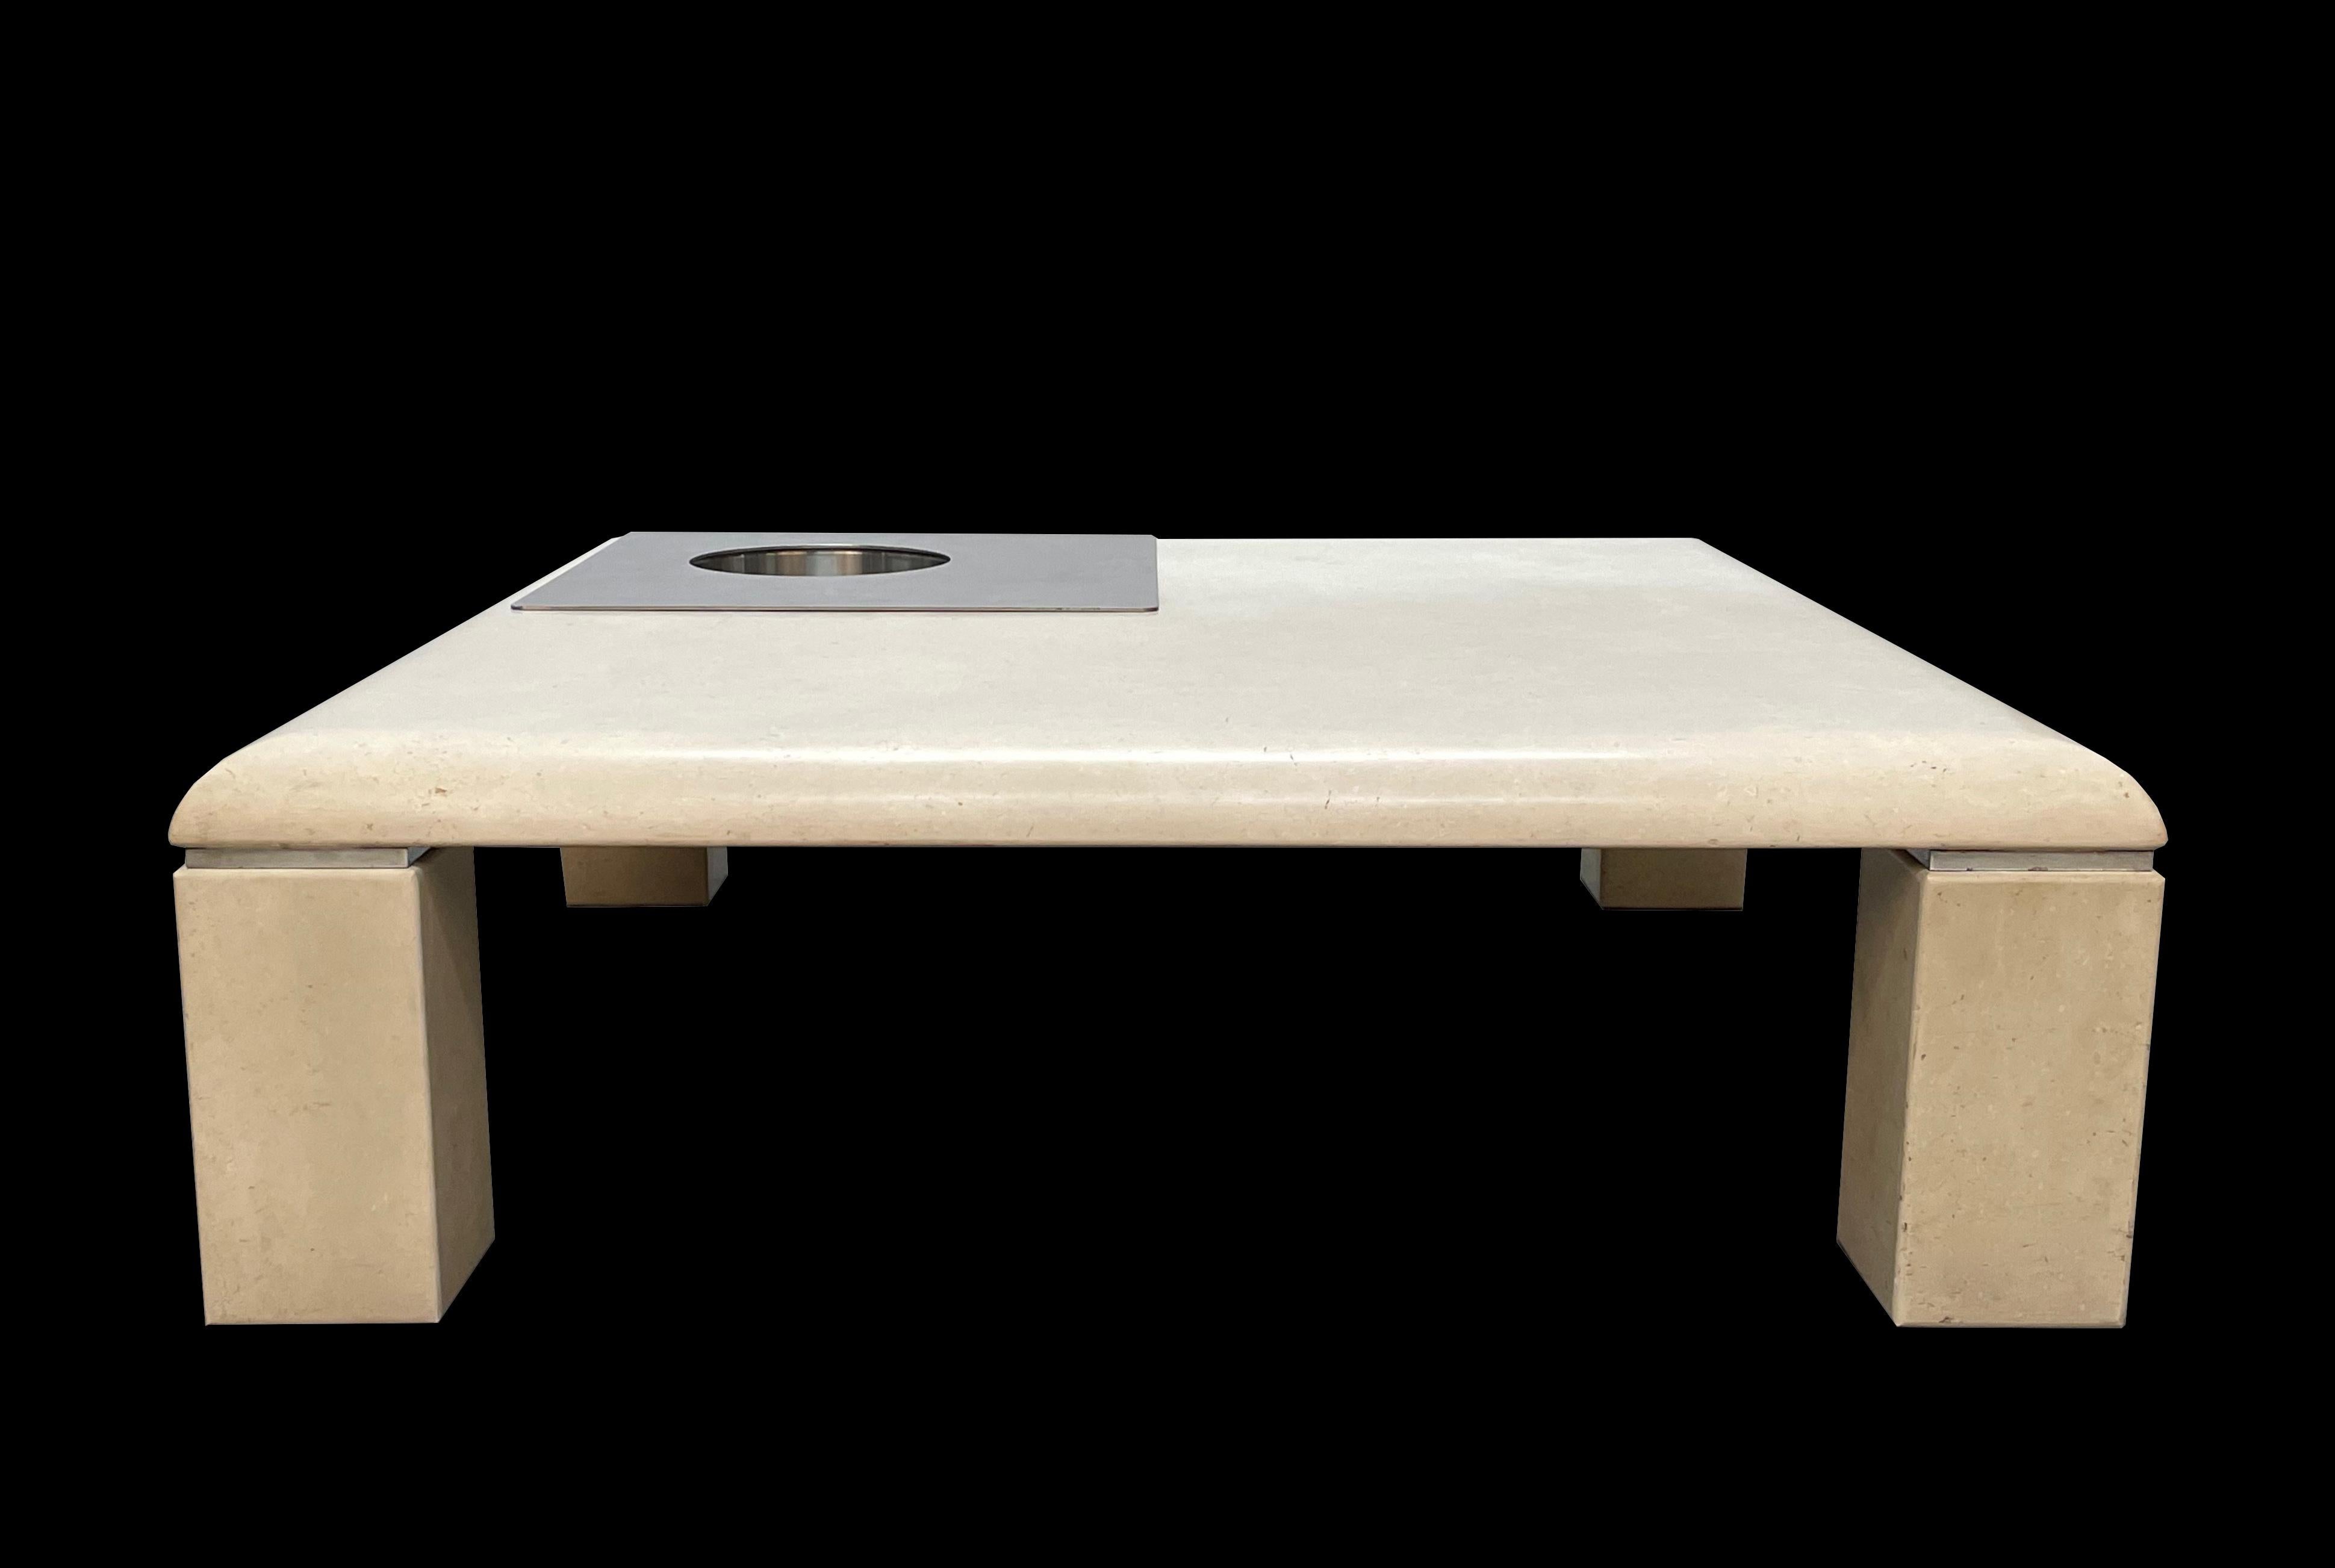 Stainless Steel Willy Rizzo Italian Squared White Botticino Marble and Steel Coffee Table, 1970 For Sale